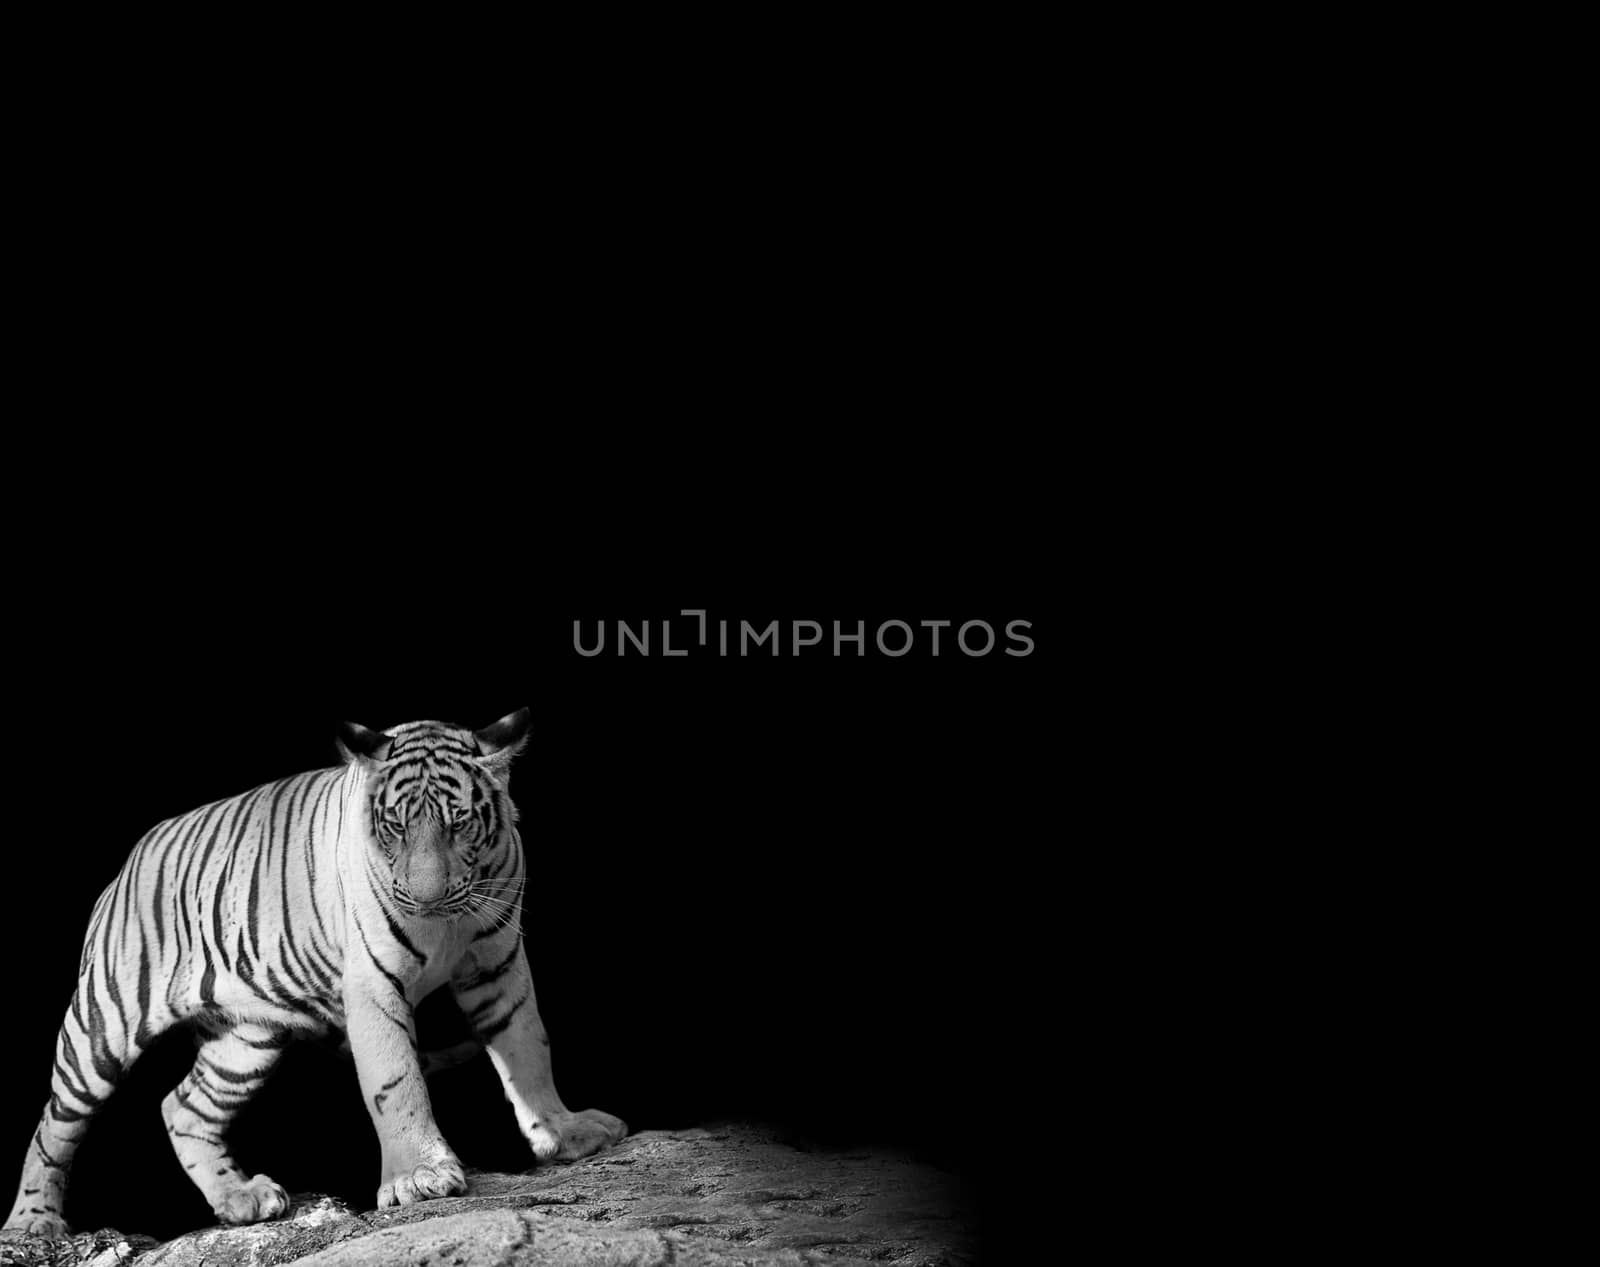 animal wildlife concept. Black & White Beautiful tiger - isolated on black background by asiandelight